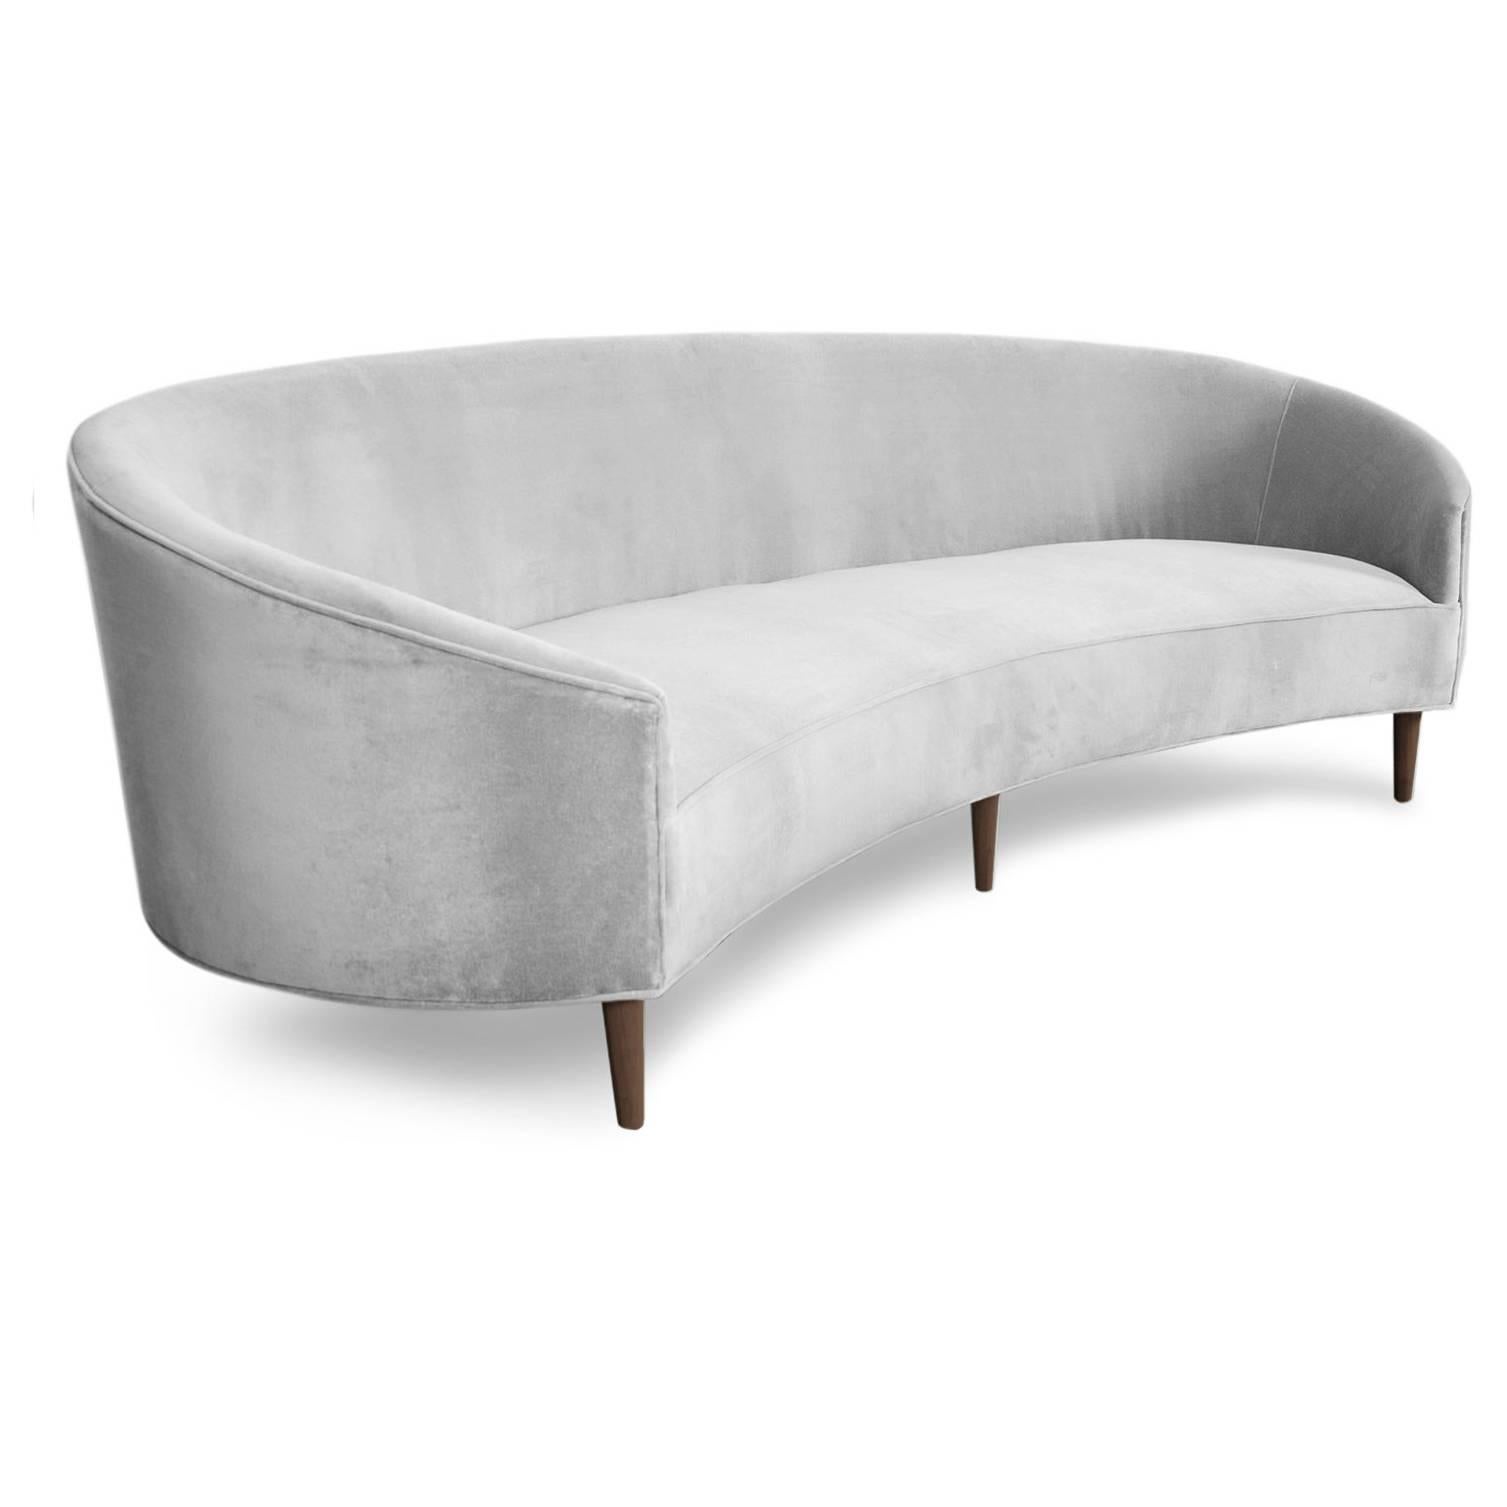 With Classic clean lines and sharp curves comes this Art Deco sofa. Uniquely shaped, similar to a crescent, curved in arms and six walnut cone legs put together in elegance. Shown in Sharkskin velvet.

Measures: 105" W x 40" D x 31"